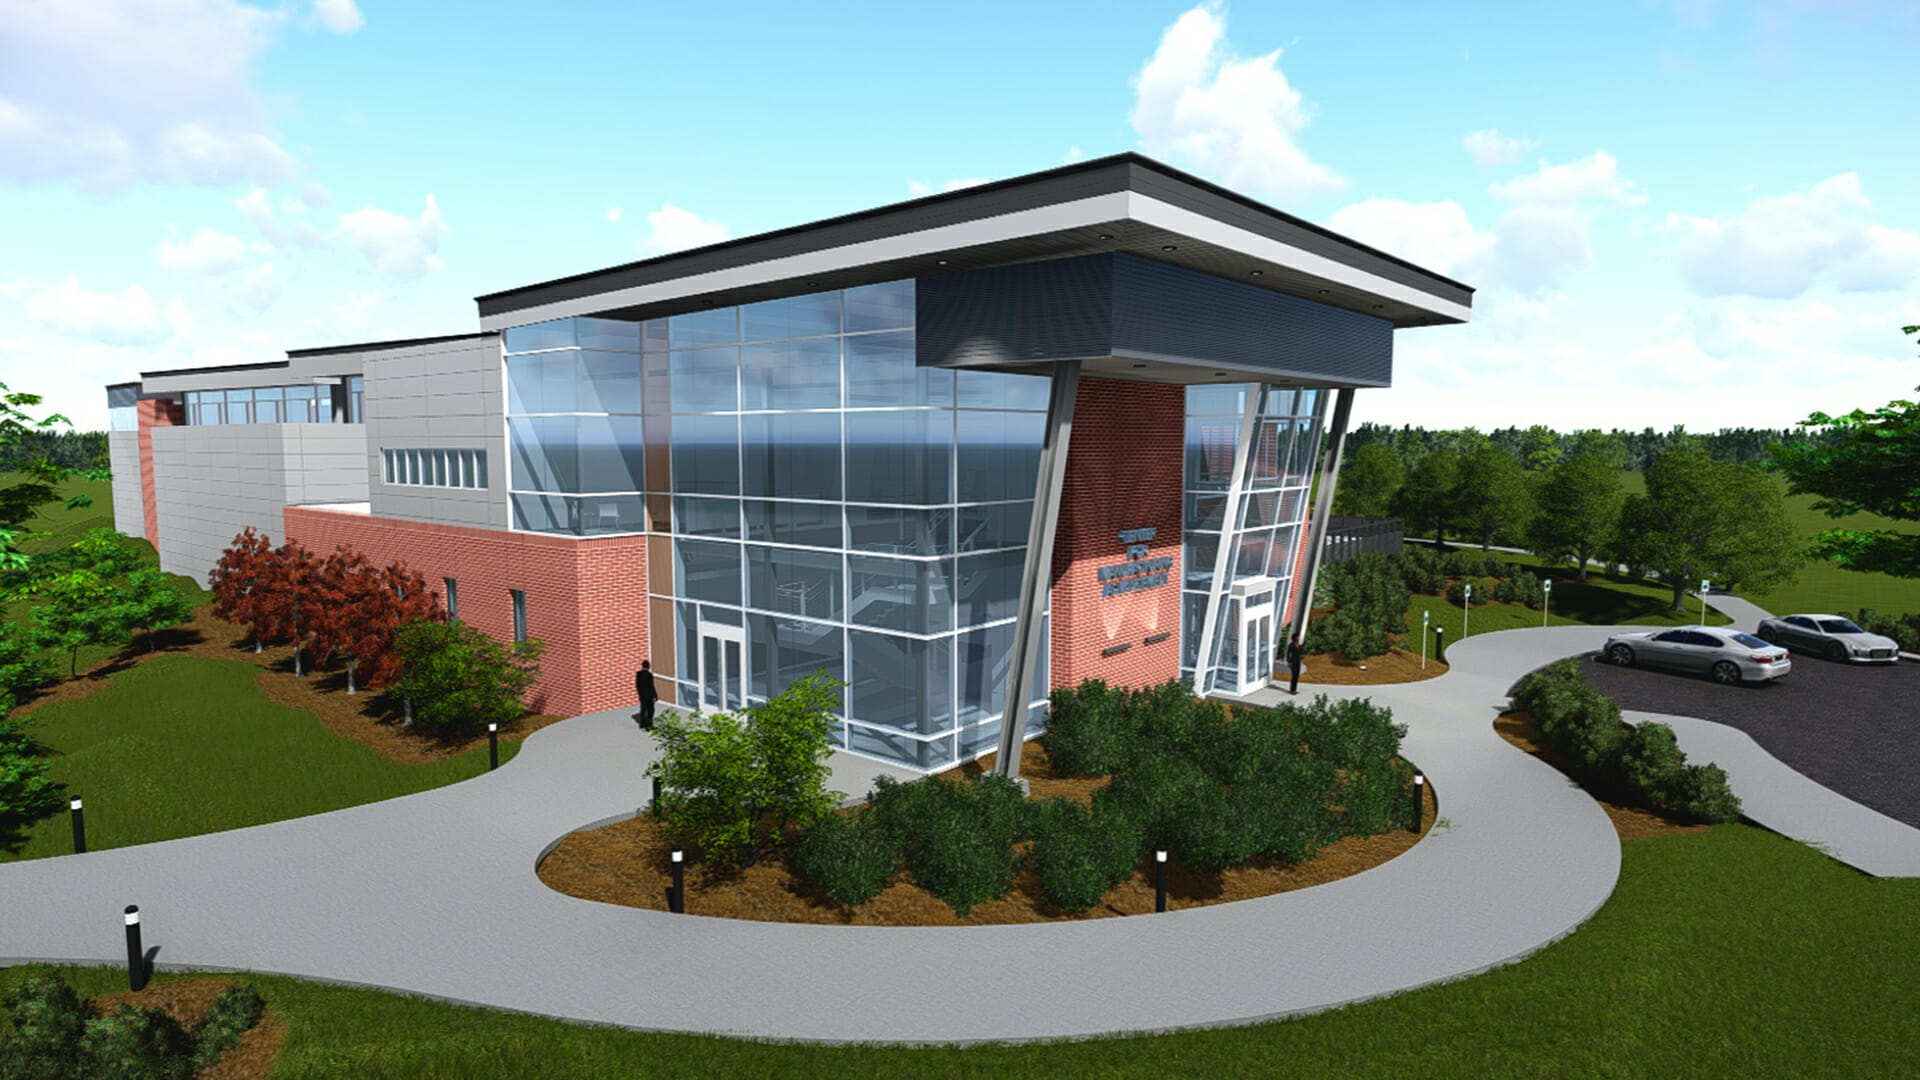 Rendering of the proposed CMA. Image via IALR.